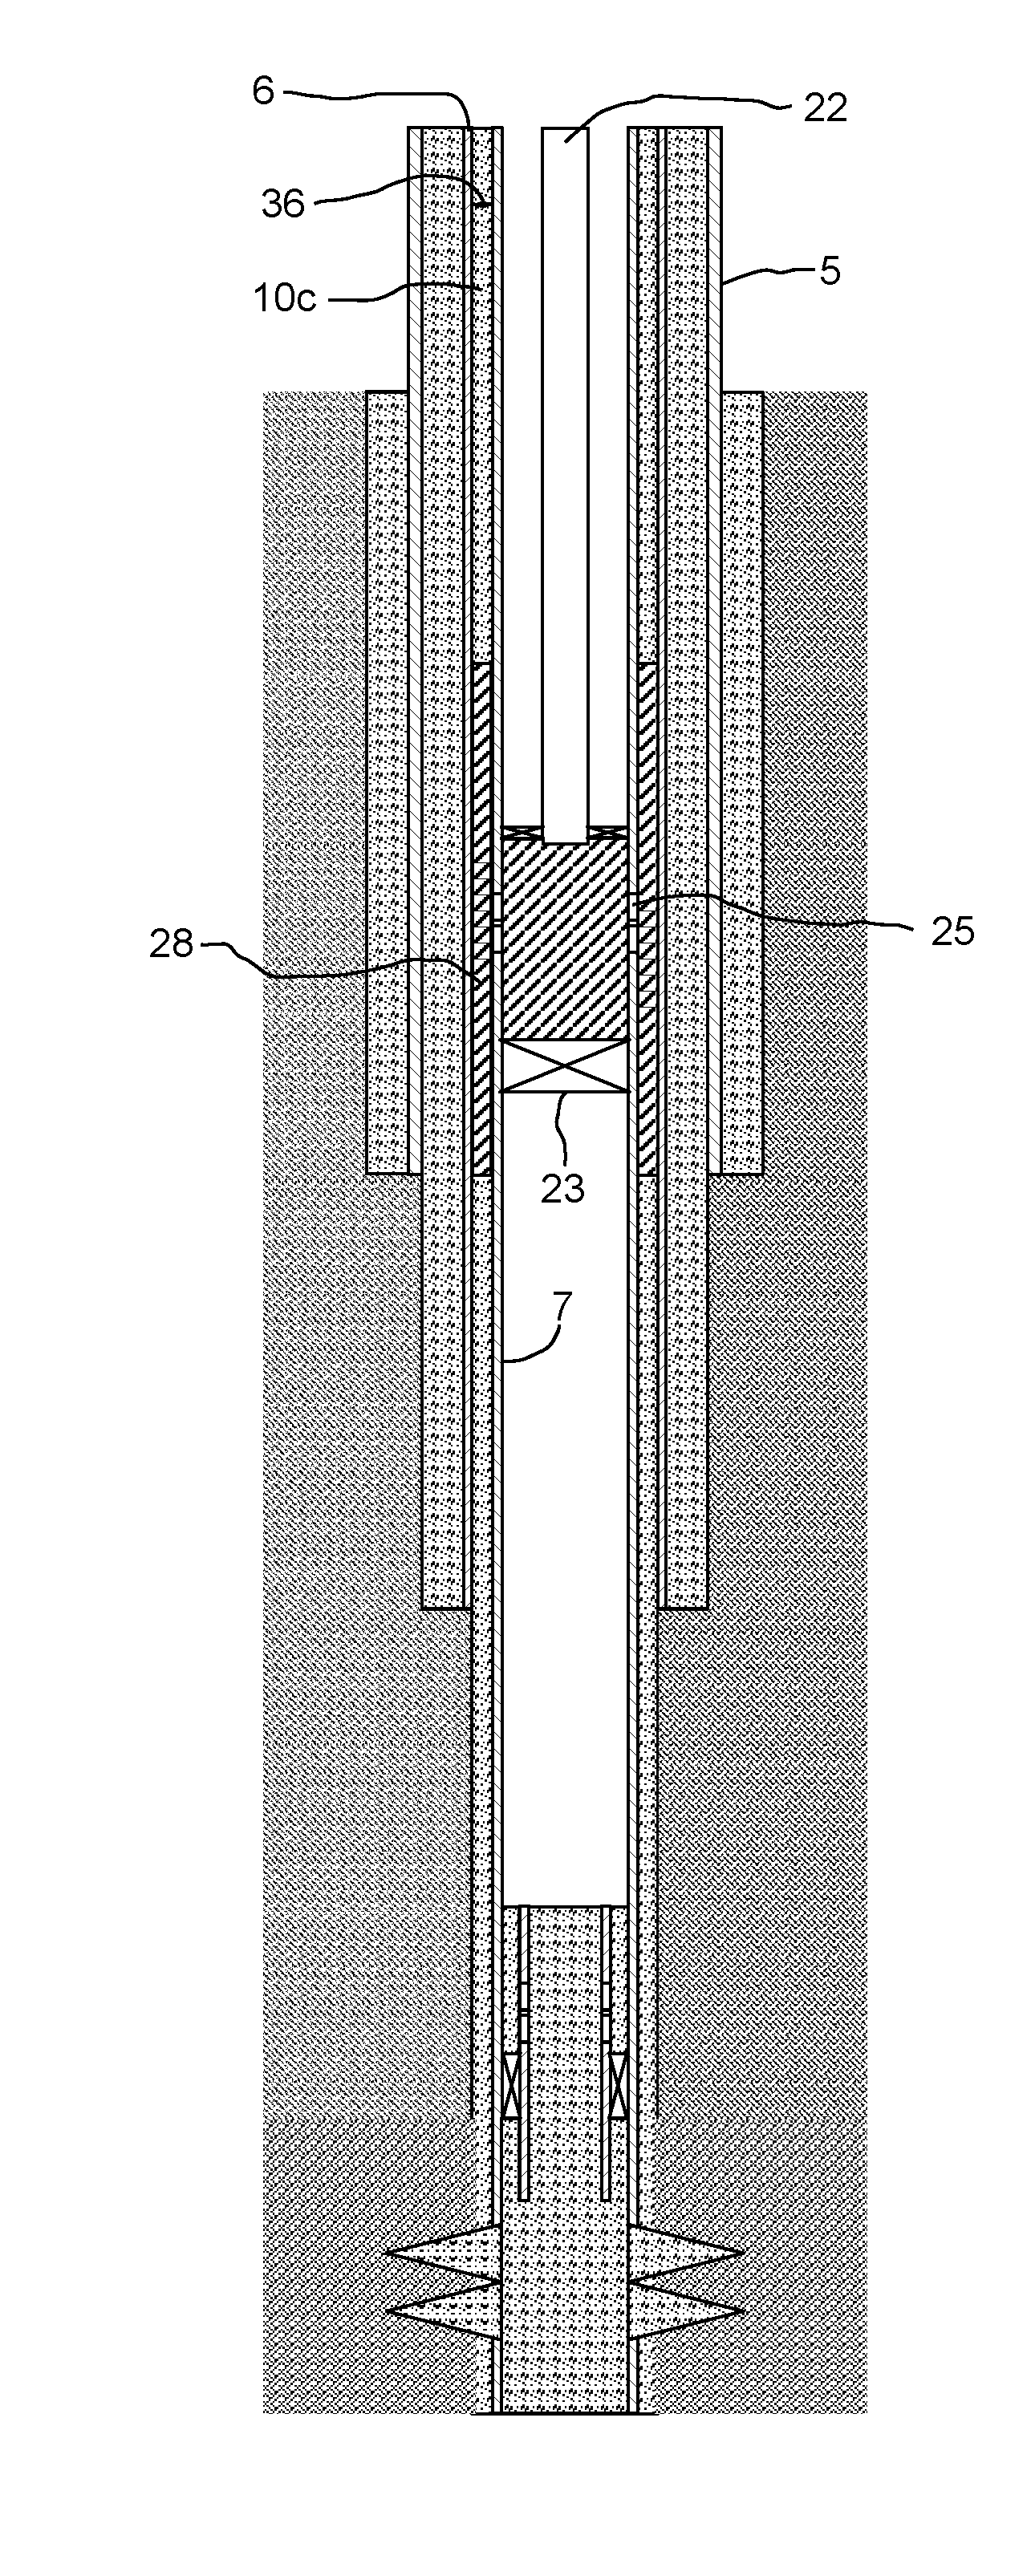 Method of sealing wells by squeezing sealant